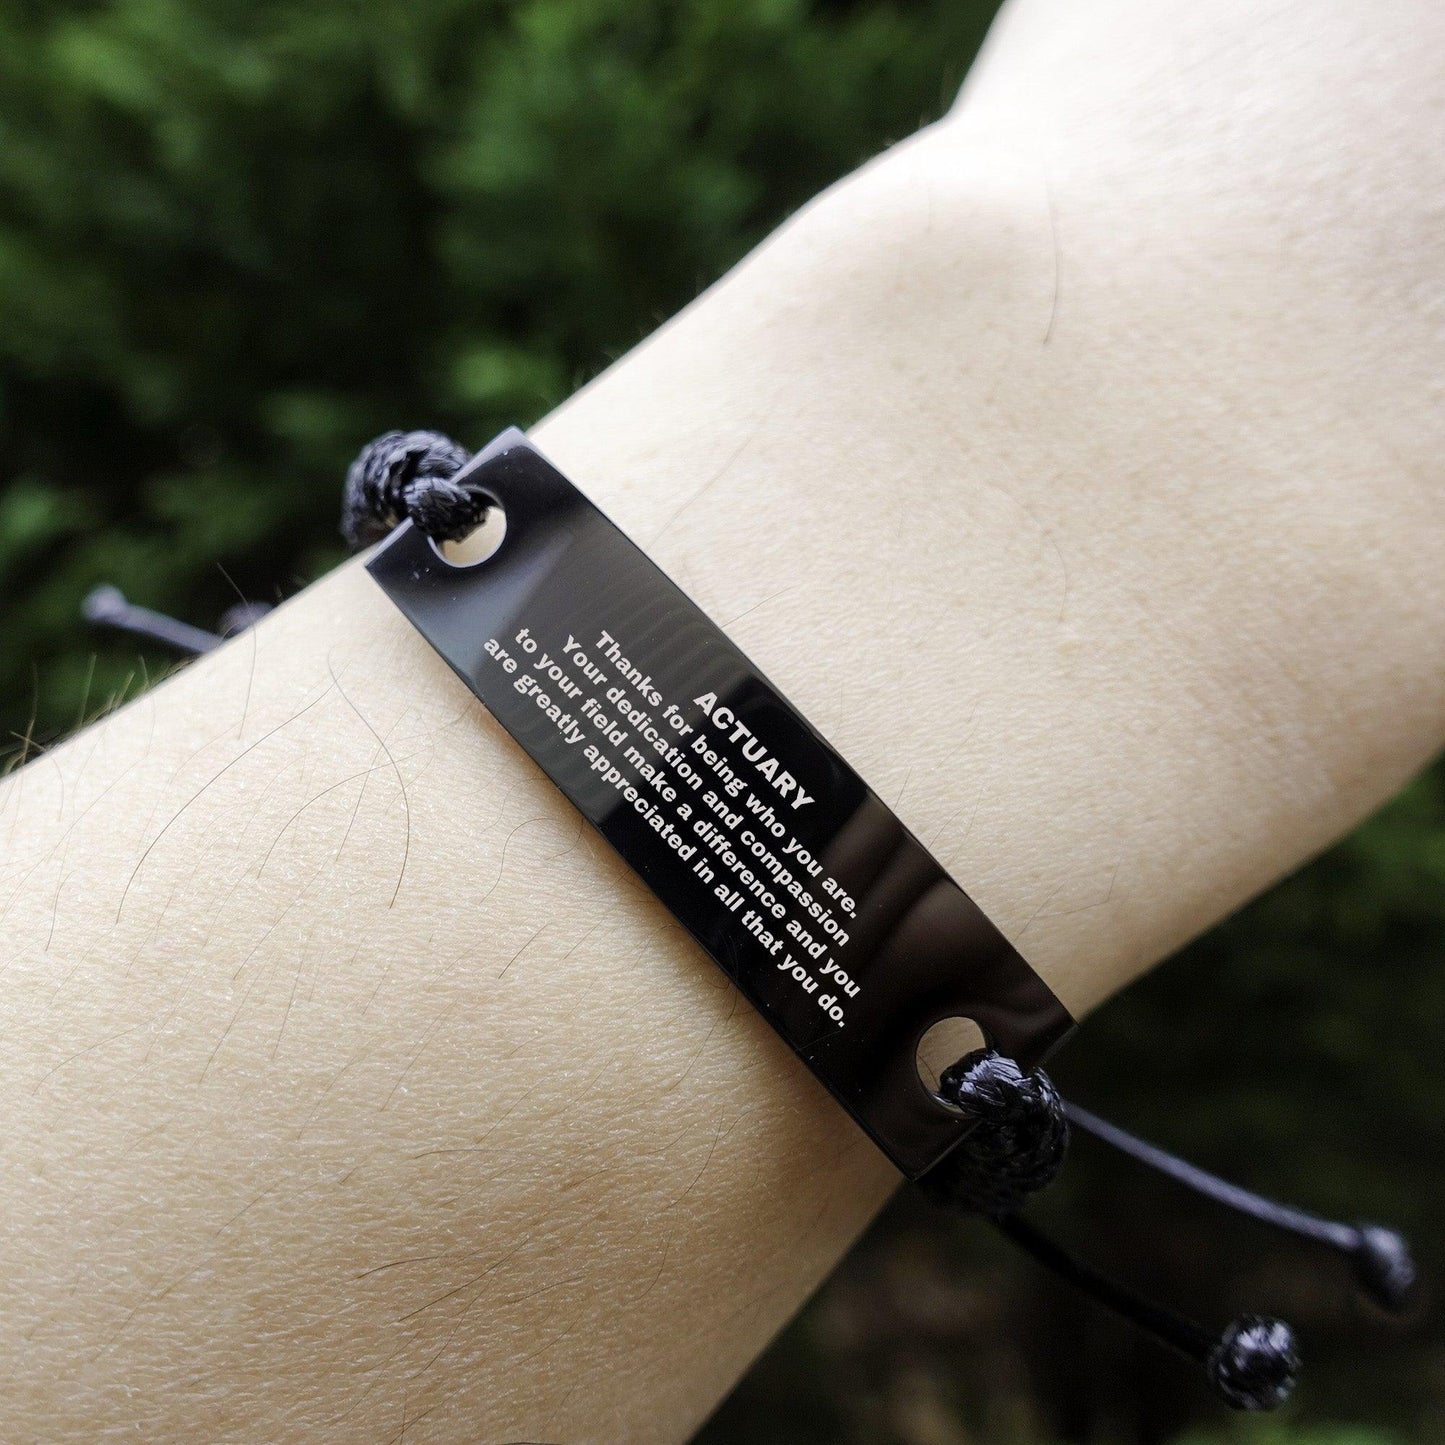 Actuary Black Braided Leather Rope Engraved Bracelet - Thanks for being who you are - Birthday Christmas Jewelry Gifts Coworkers Colleague Boss - Mallard Moon Gift Shop